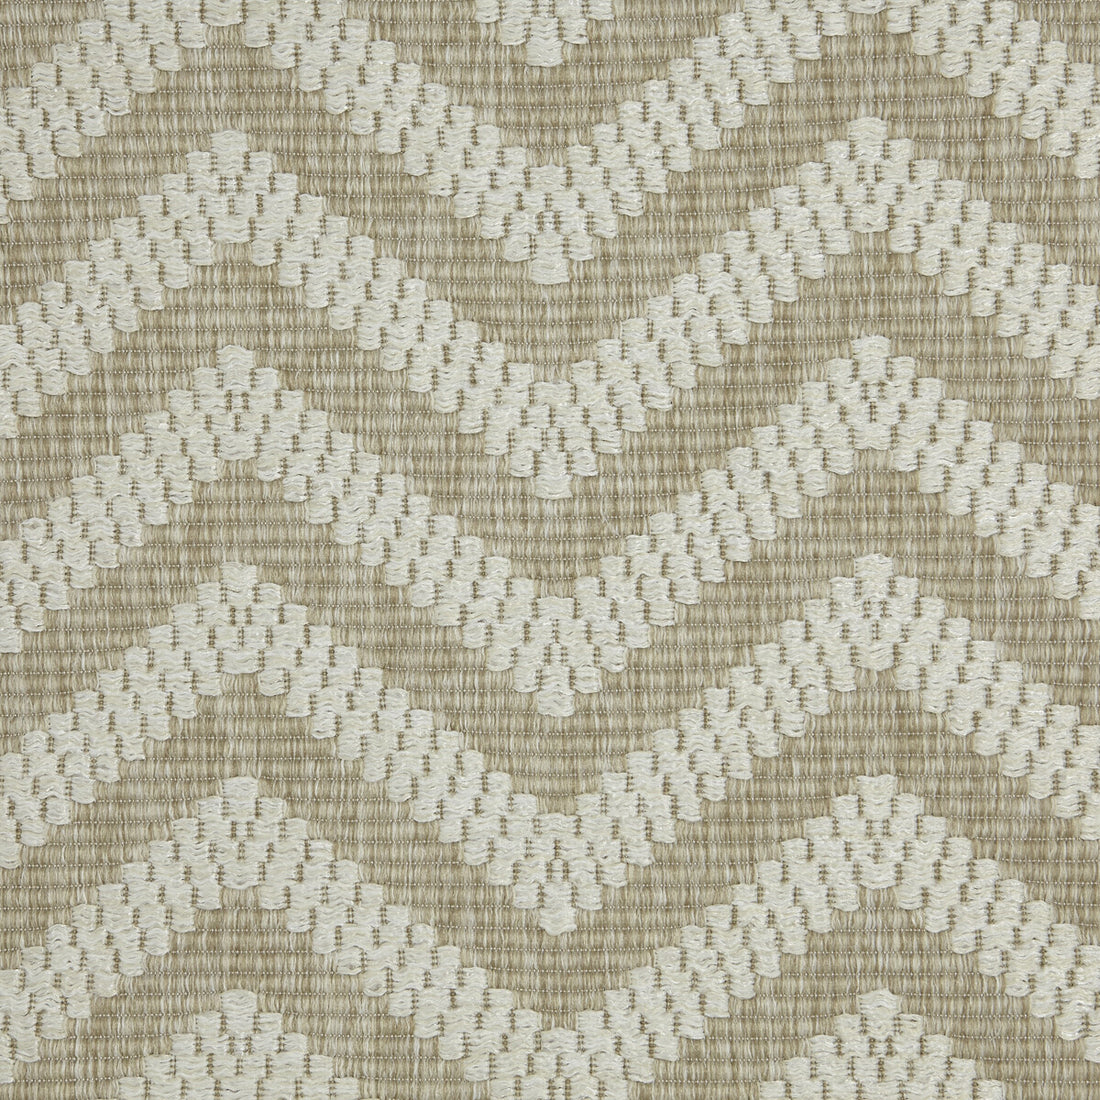 Marelle fabric in 7 color - pattern LZ-30347.07.0 - by Kravet Design in the Lizzo Indoor/Outdoor collection